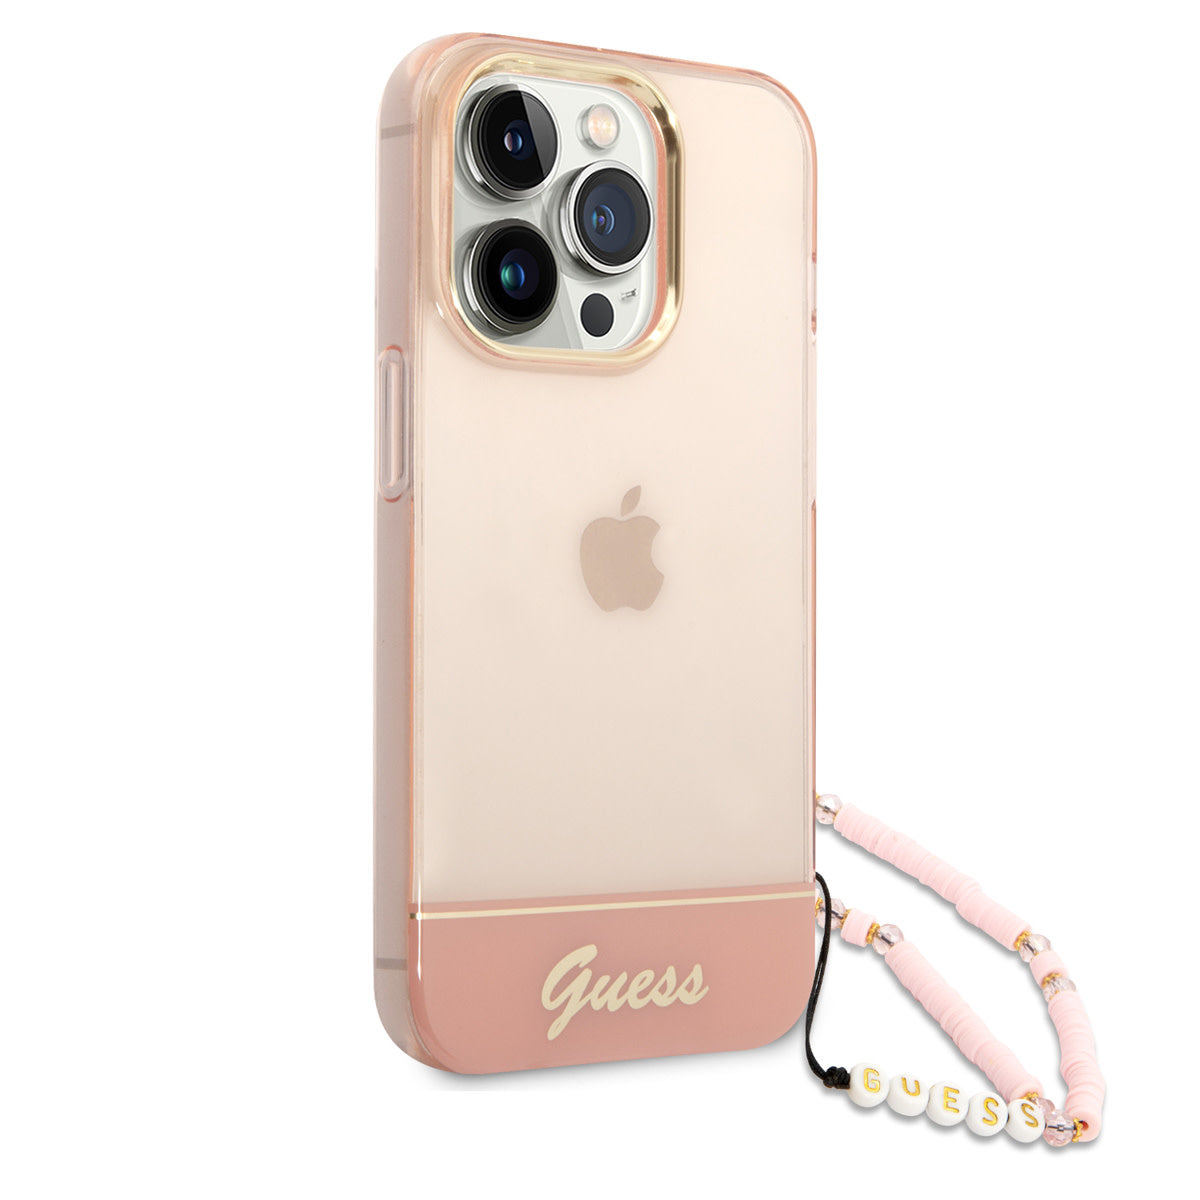 Guess iPhone 14 Pro Max Backcover - met koord - Transparant Roze